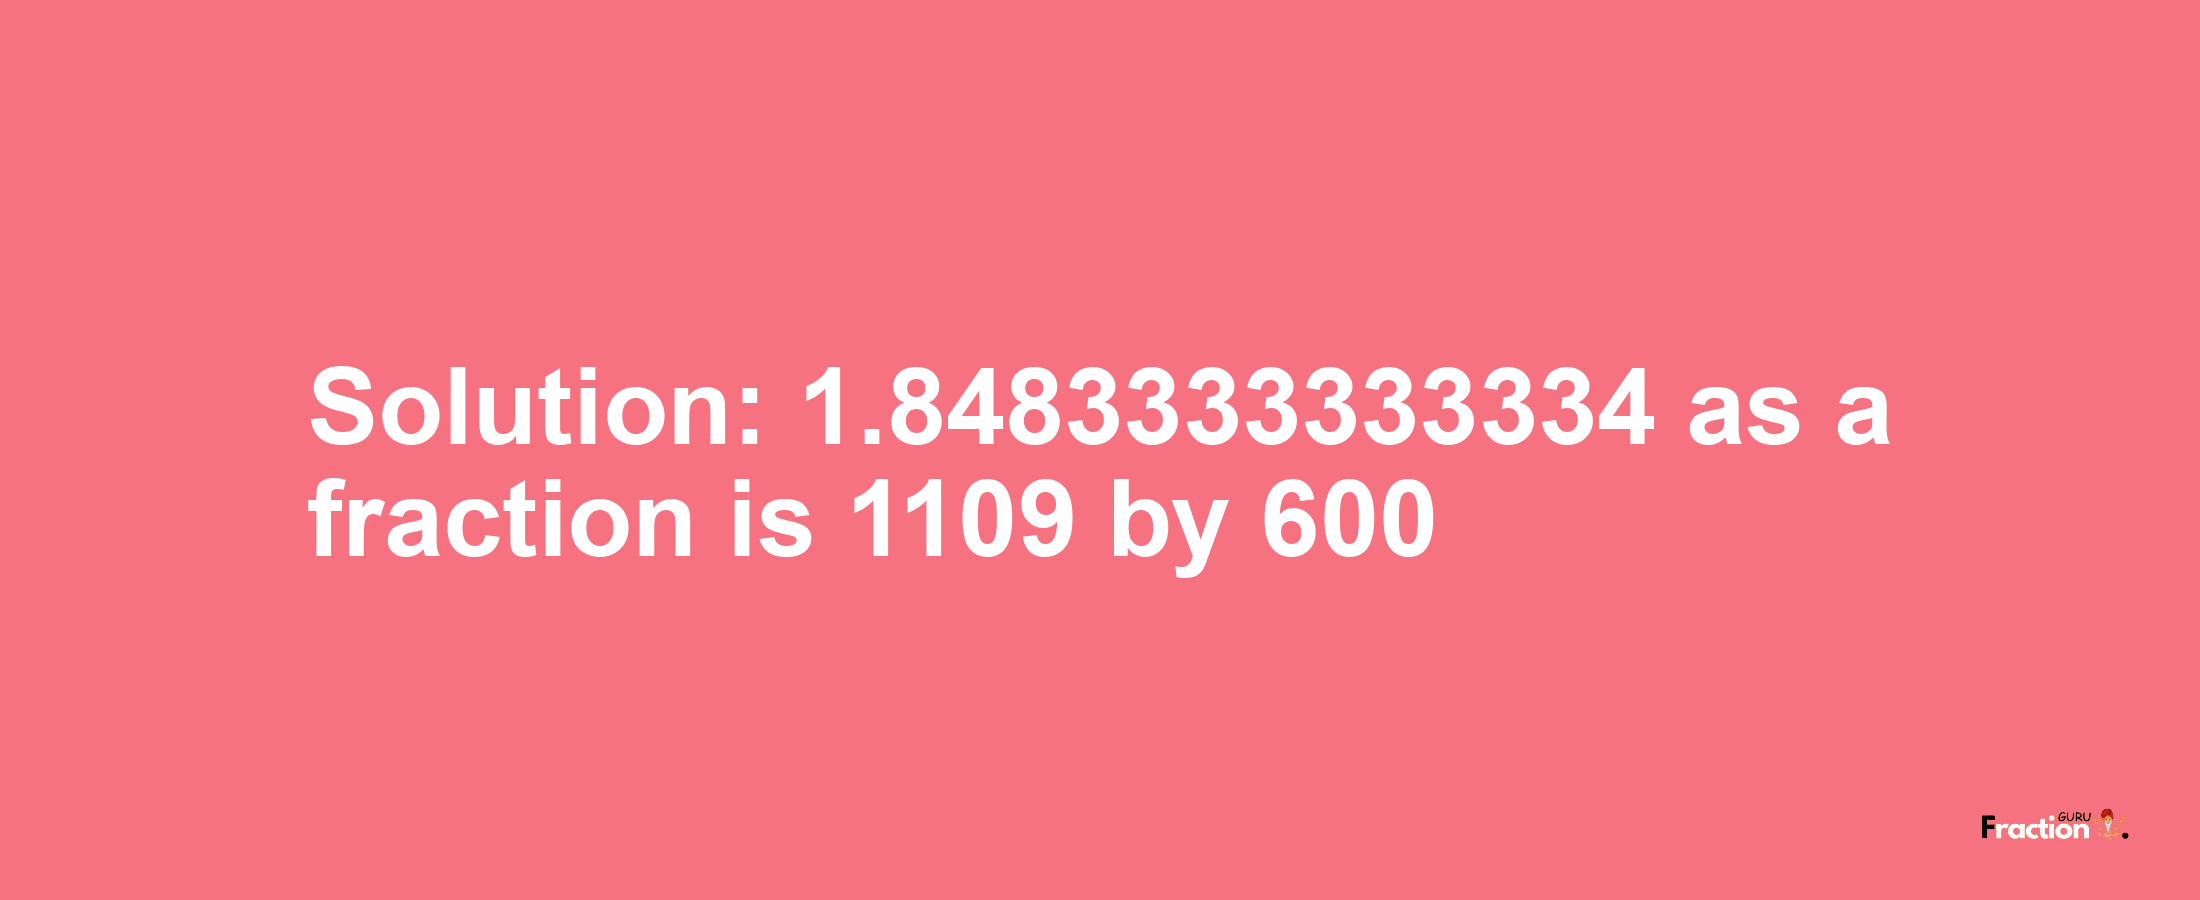 Solution:1.8483333333334 as a fraction is 1109/600